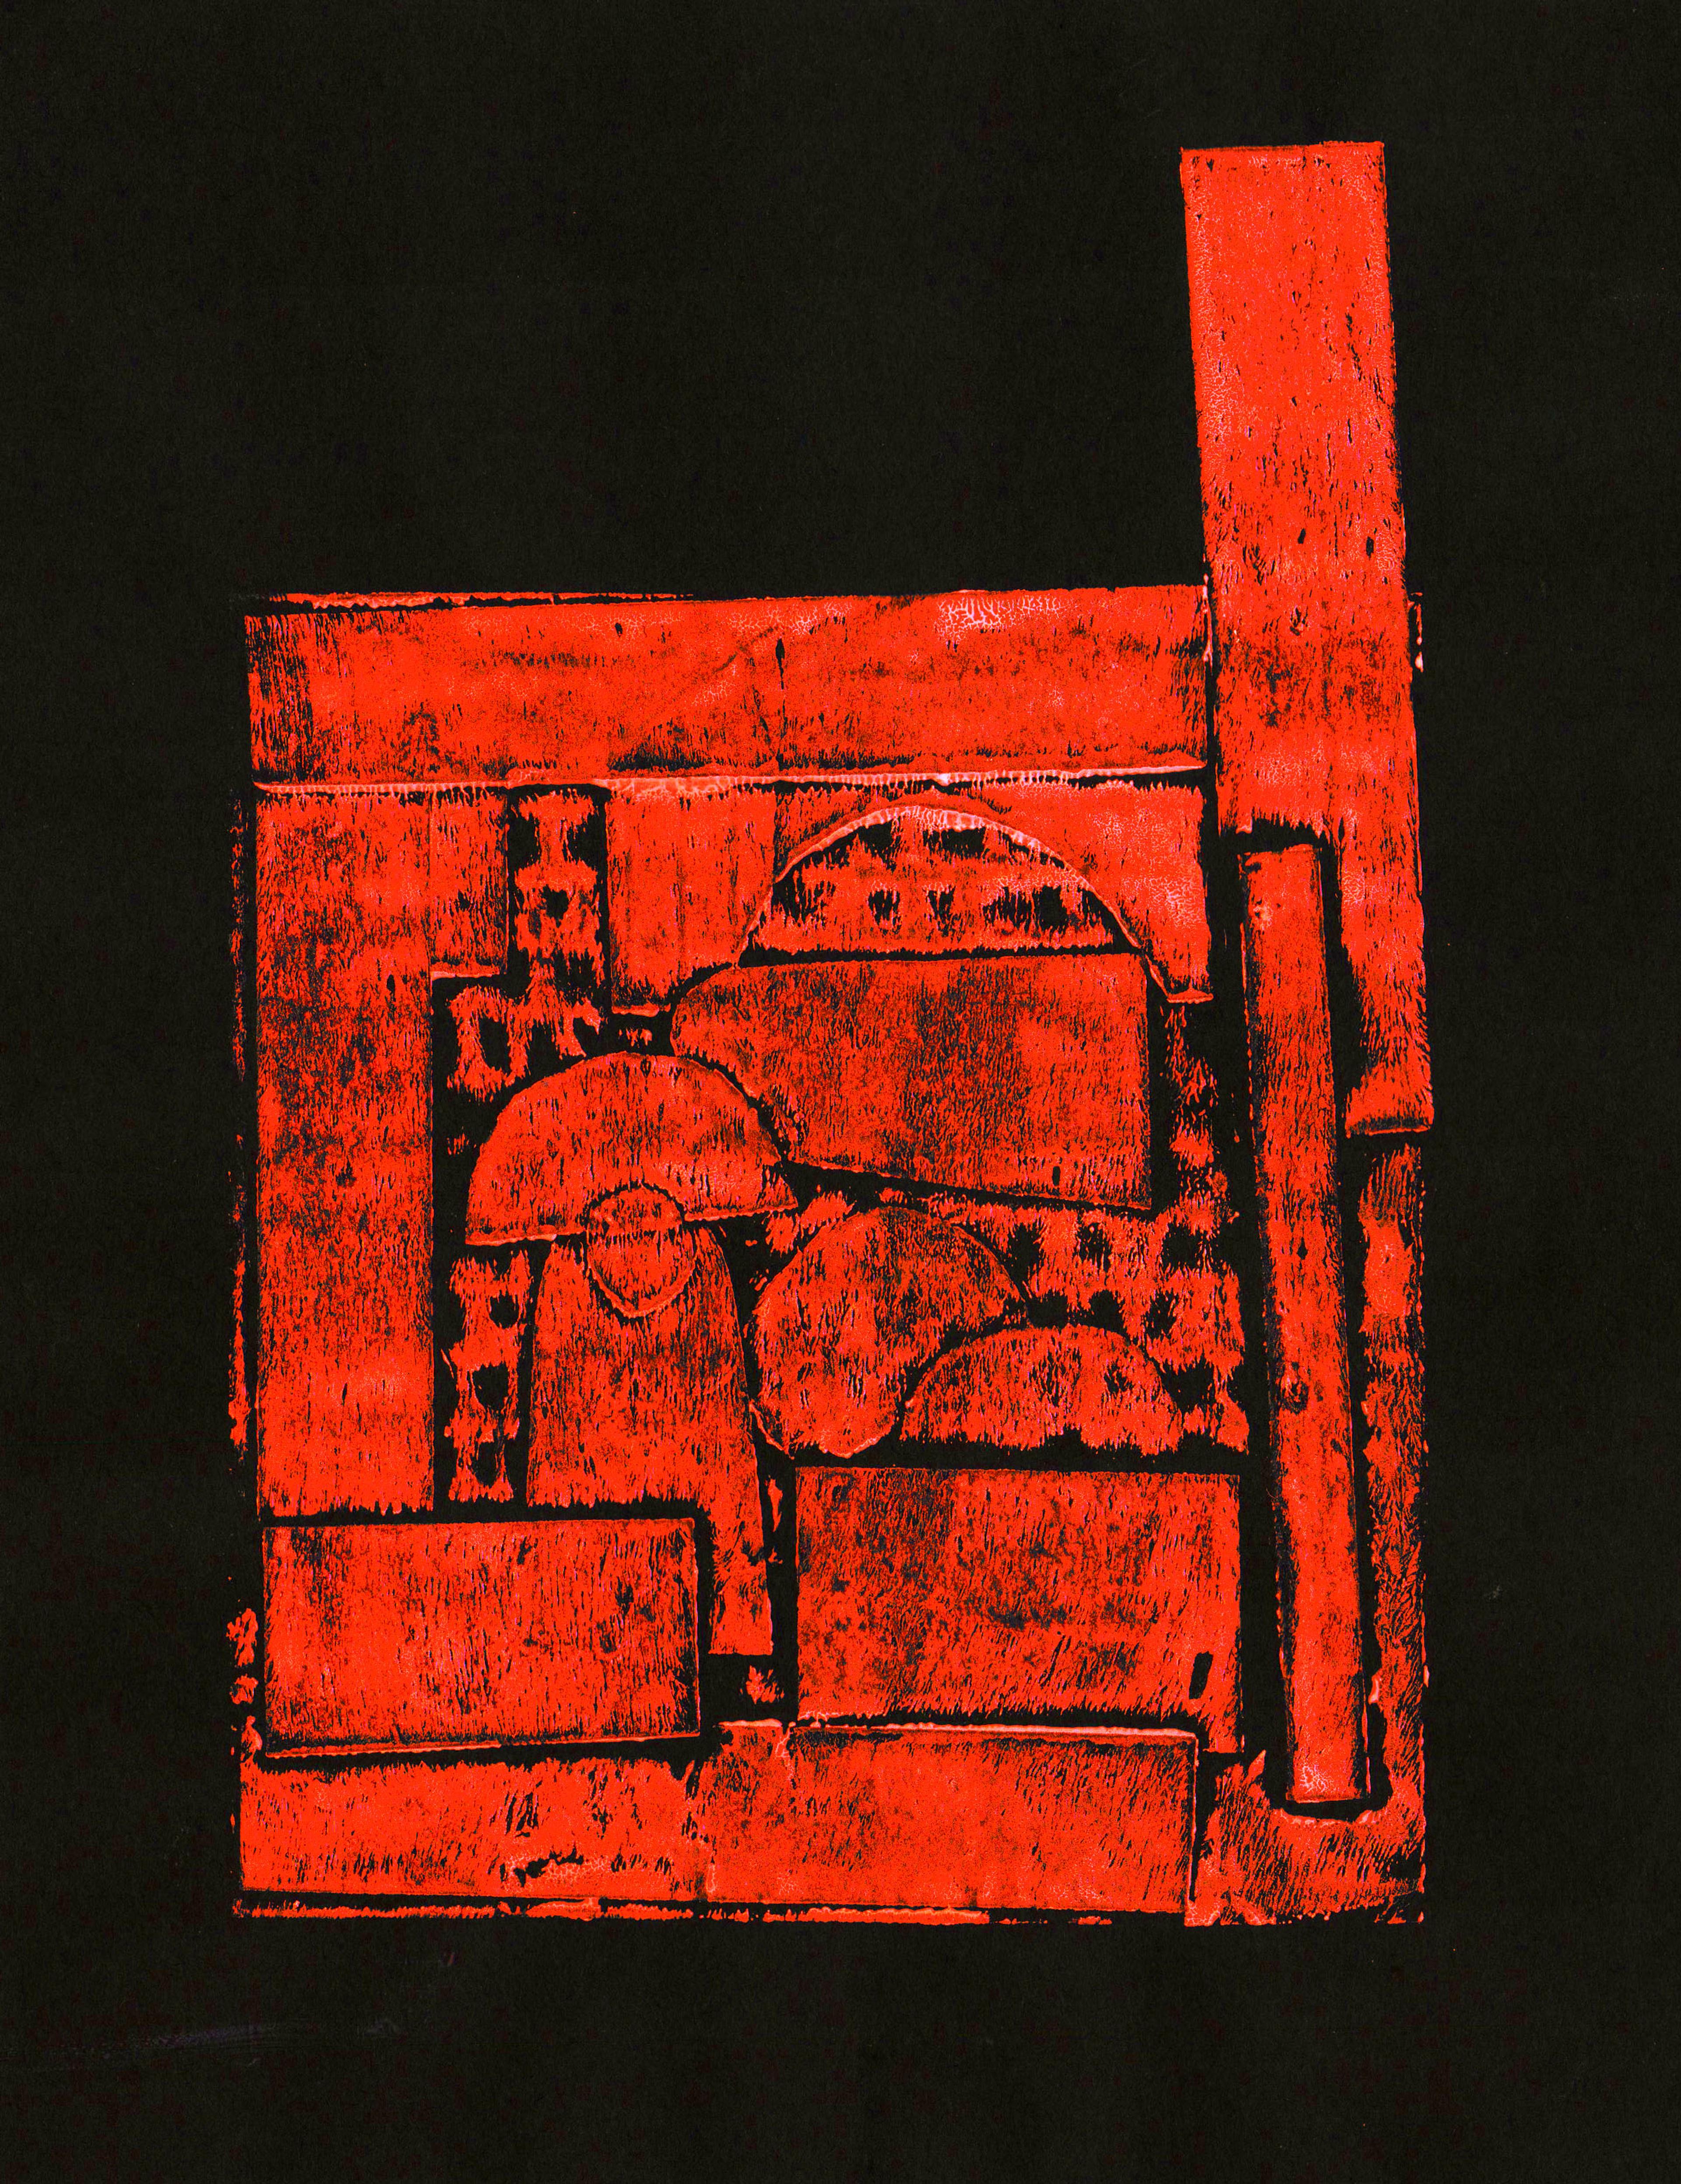 Ink-on-paper illustration of a bright red house drawn on a black background. A chimney stands up on the top right side of the house. The interior of the house is shown in cross section. A child playing with toys is represented by abstract geometric shapes inside the house.